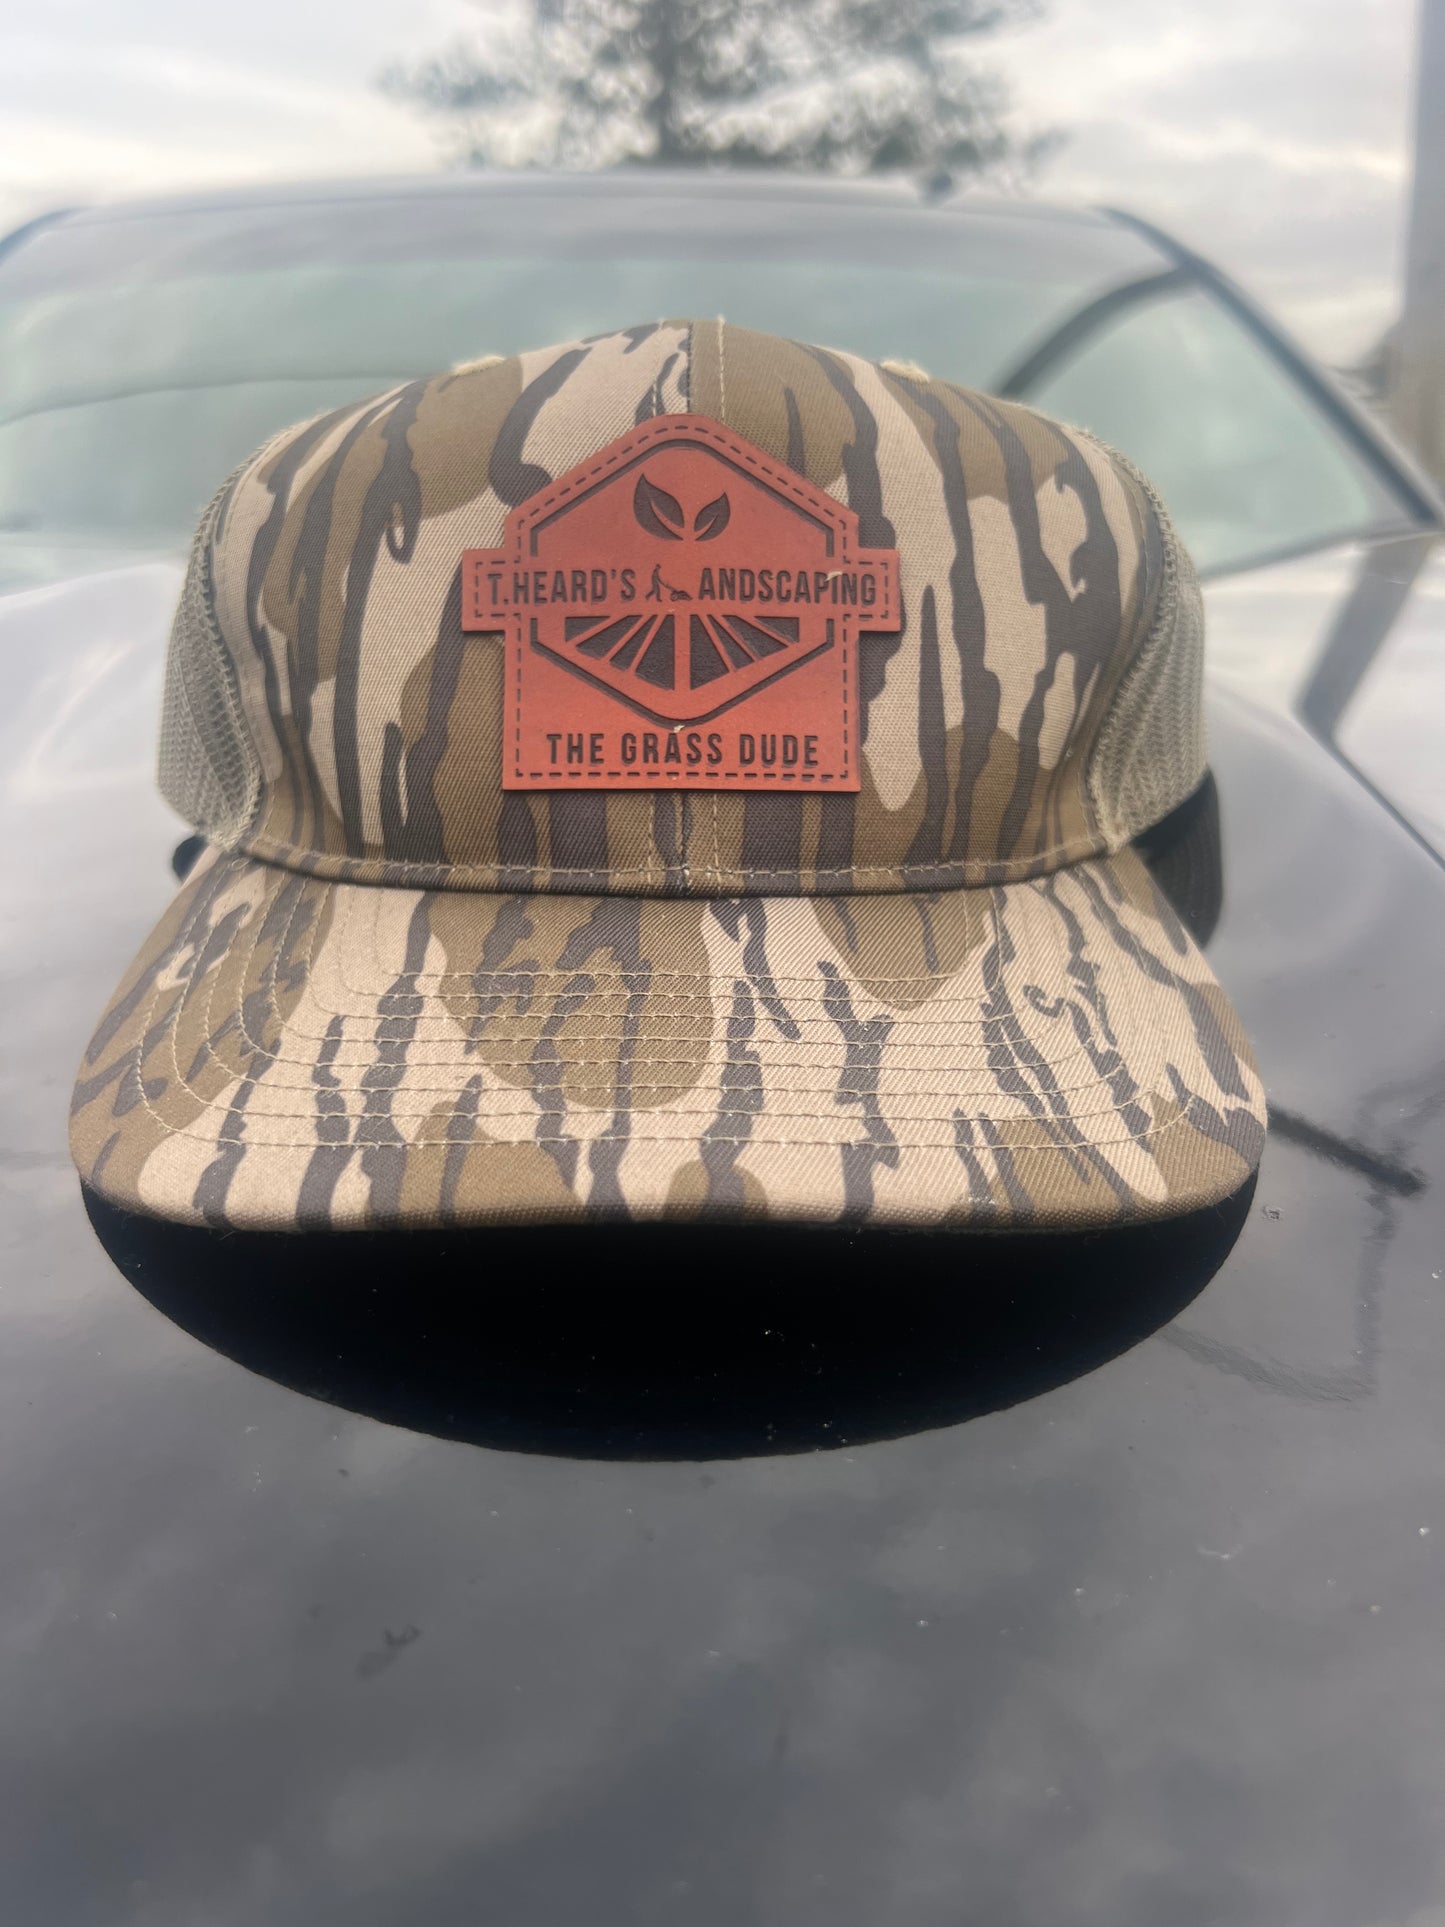 T.Heard's Landscaping Leather Patch Hat